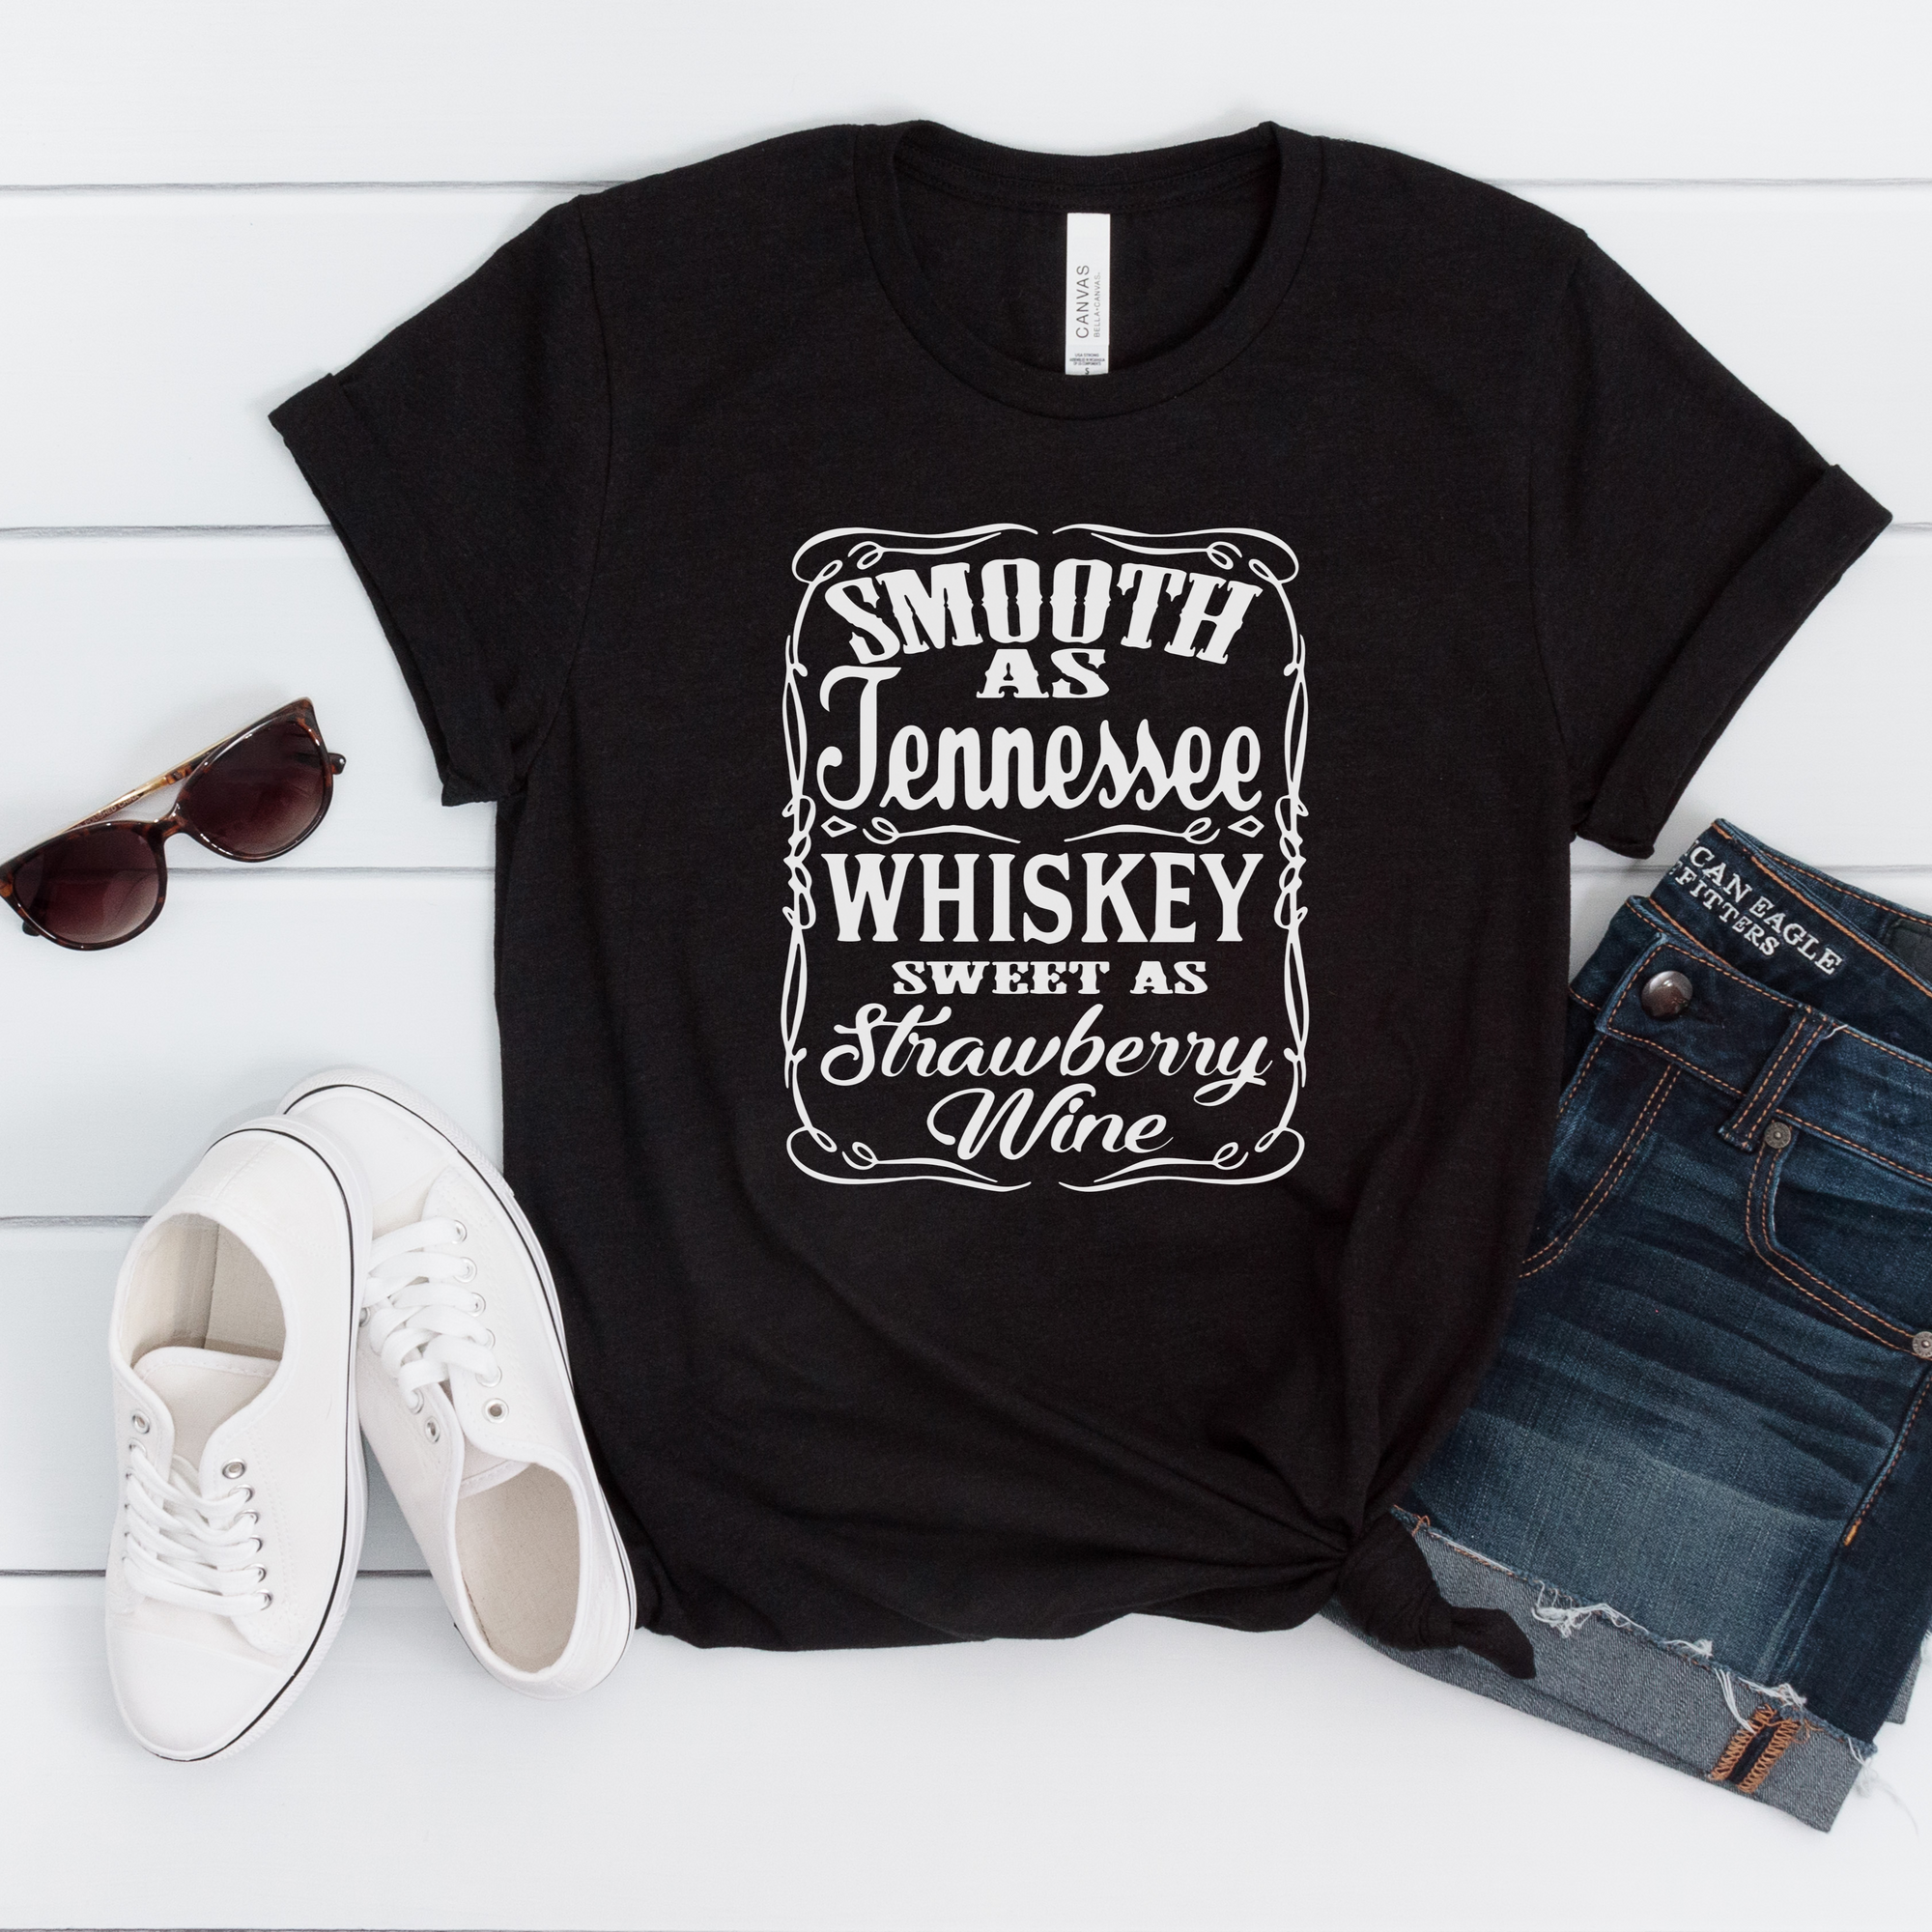 Strawberry Wine and Tennessee Whiskey Tee